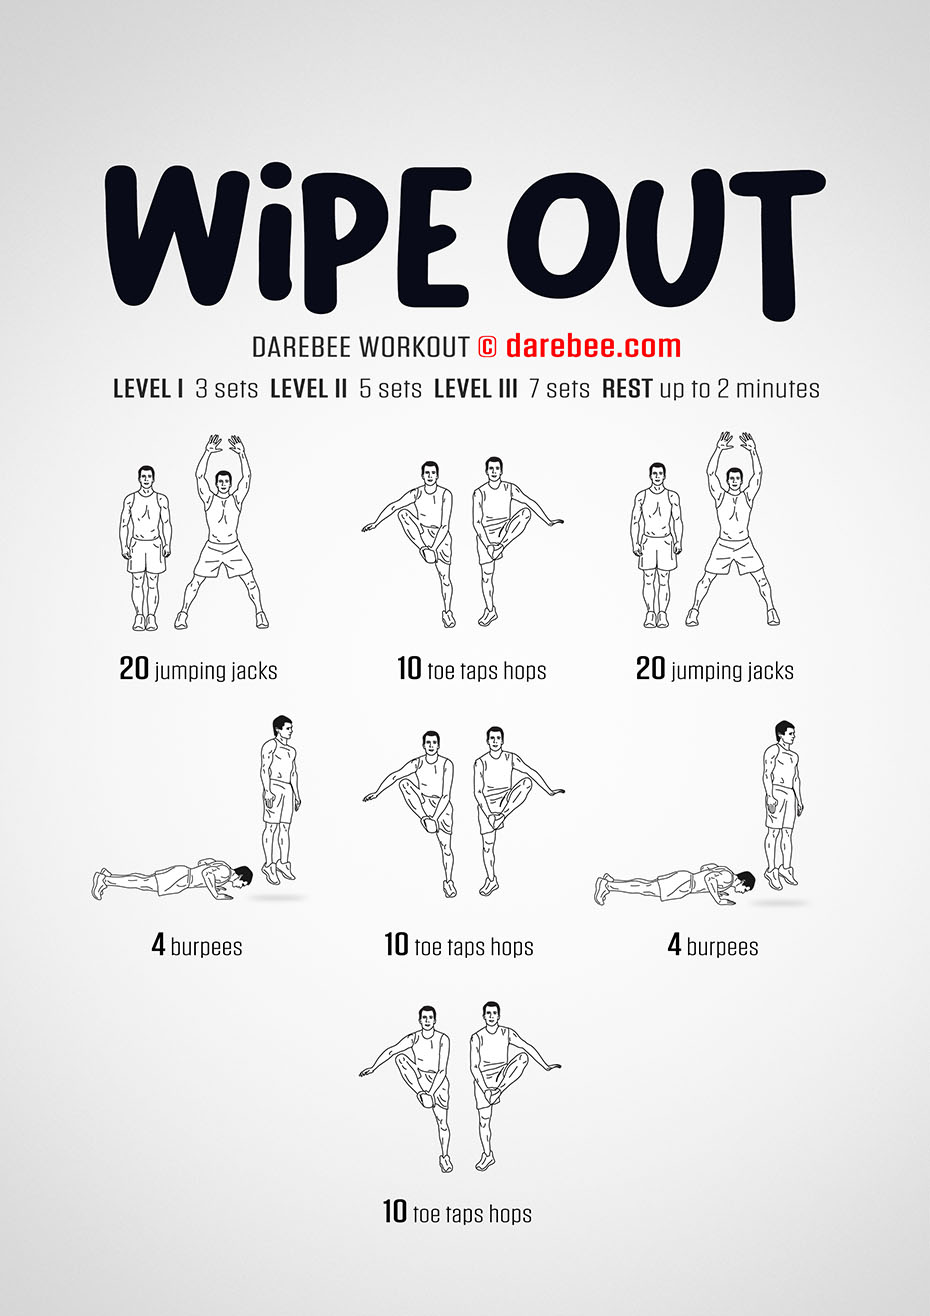 Wipe Out is a Darebee home fitness workout that uses moderate-to-high impact exercises to help you develop fascial fitness and become more resistant to fatigue.